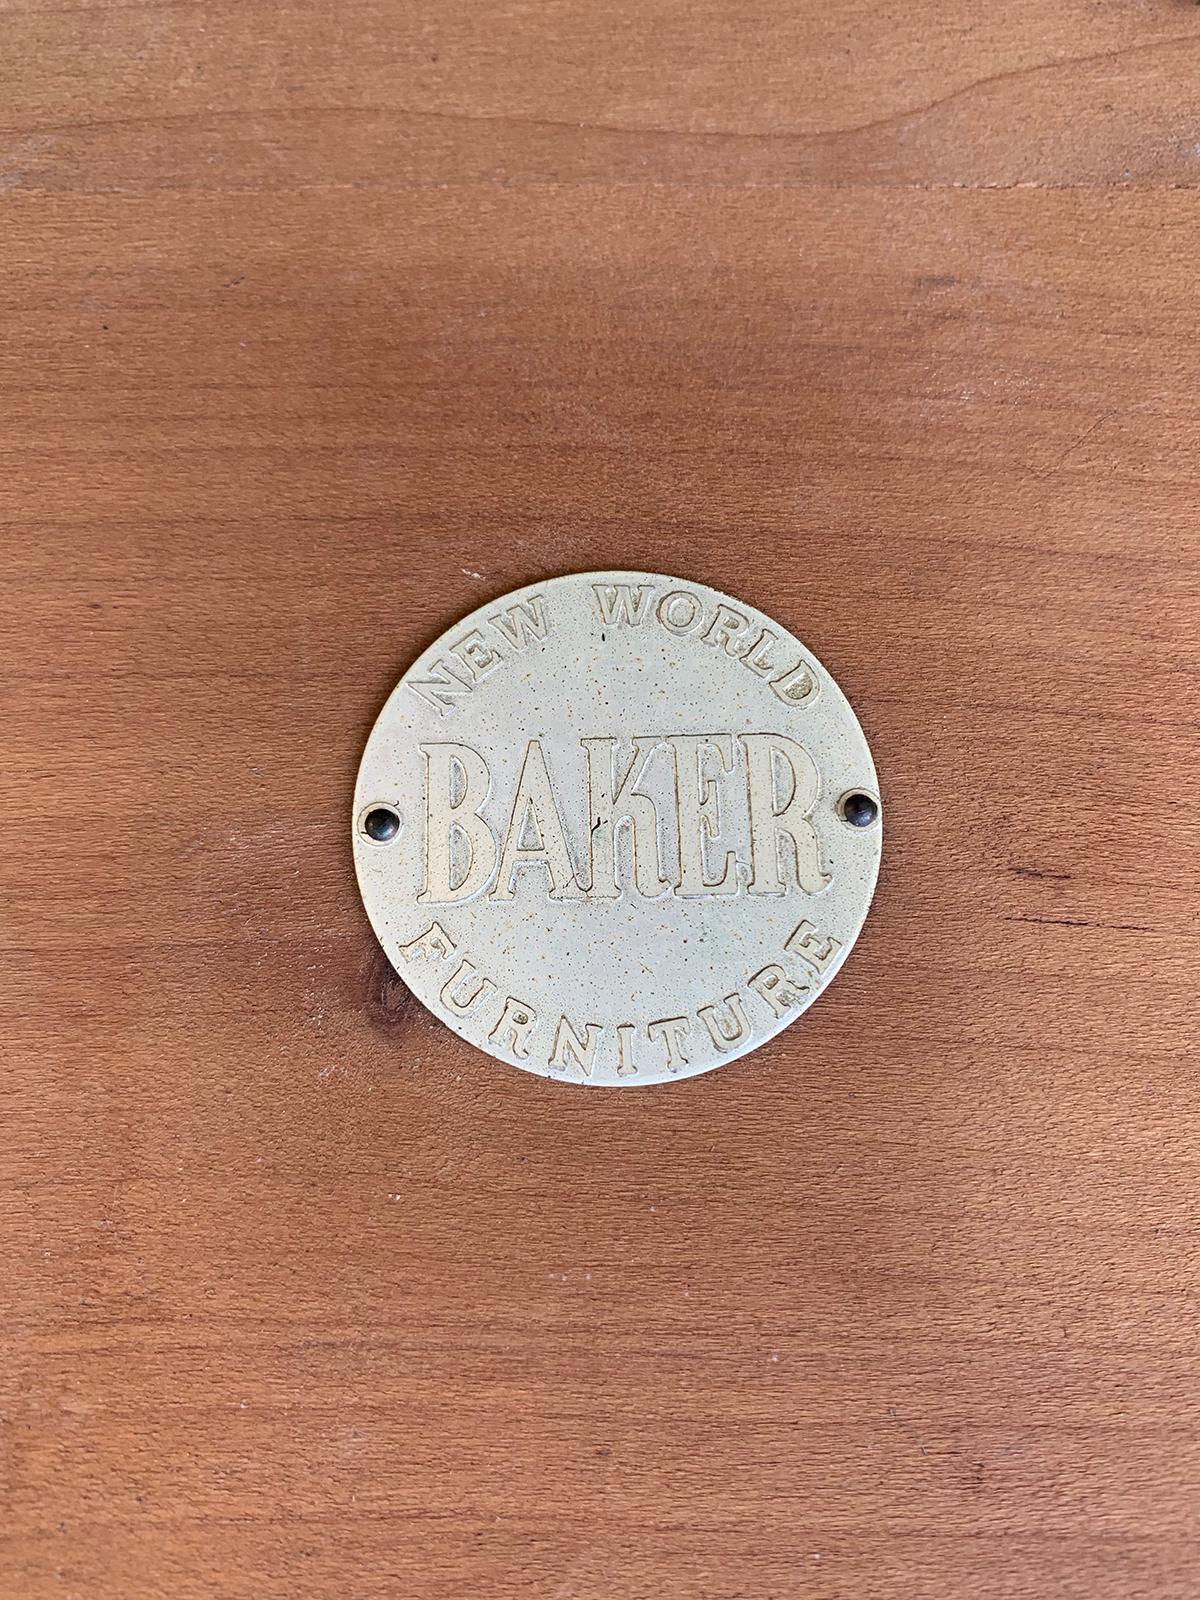 Mid-20th Century Small Wood/Brass Table by Baker Furniture, Marked
Baker Furniture mark on underside.